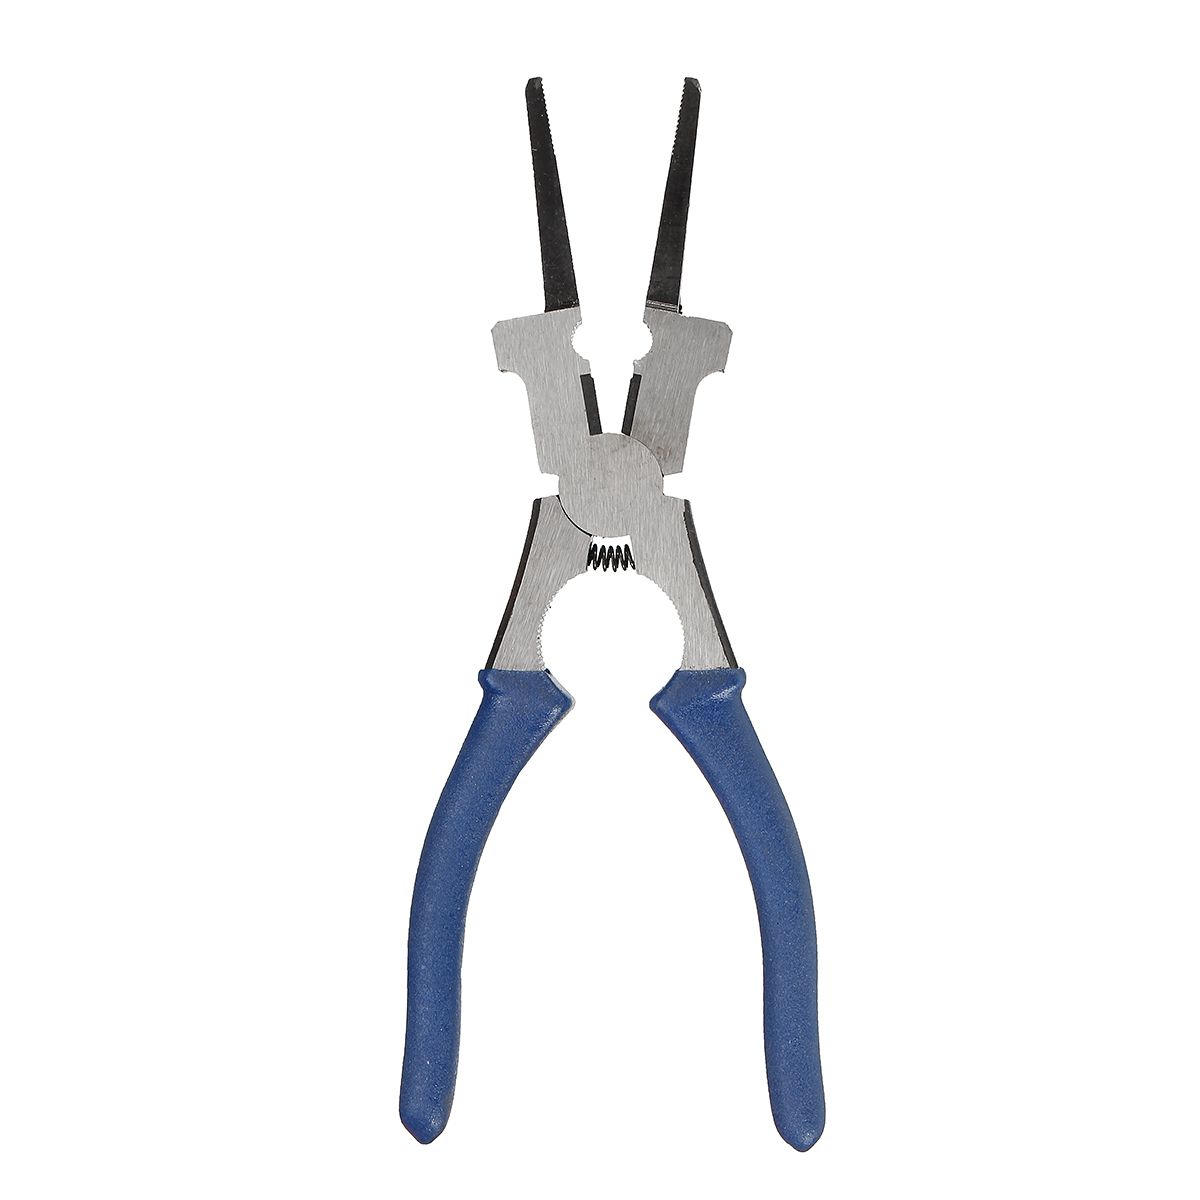 Multipurpose-Flat-Mouth-MIG-Welding-Plier-Tool-Spring-Loaded-Insulated-Handle-1264338